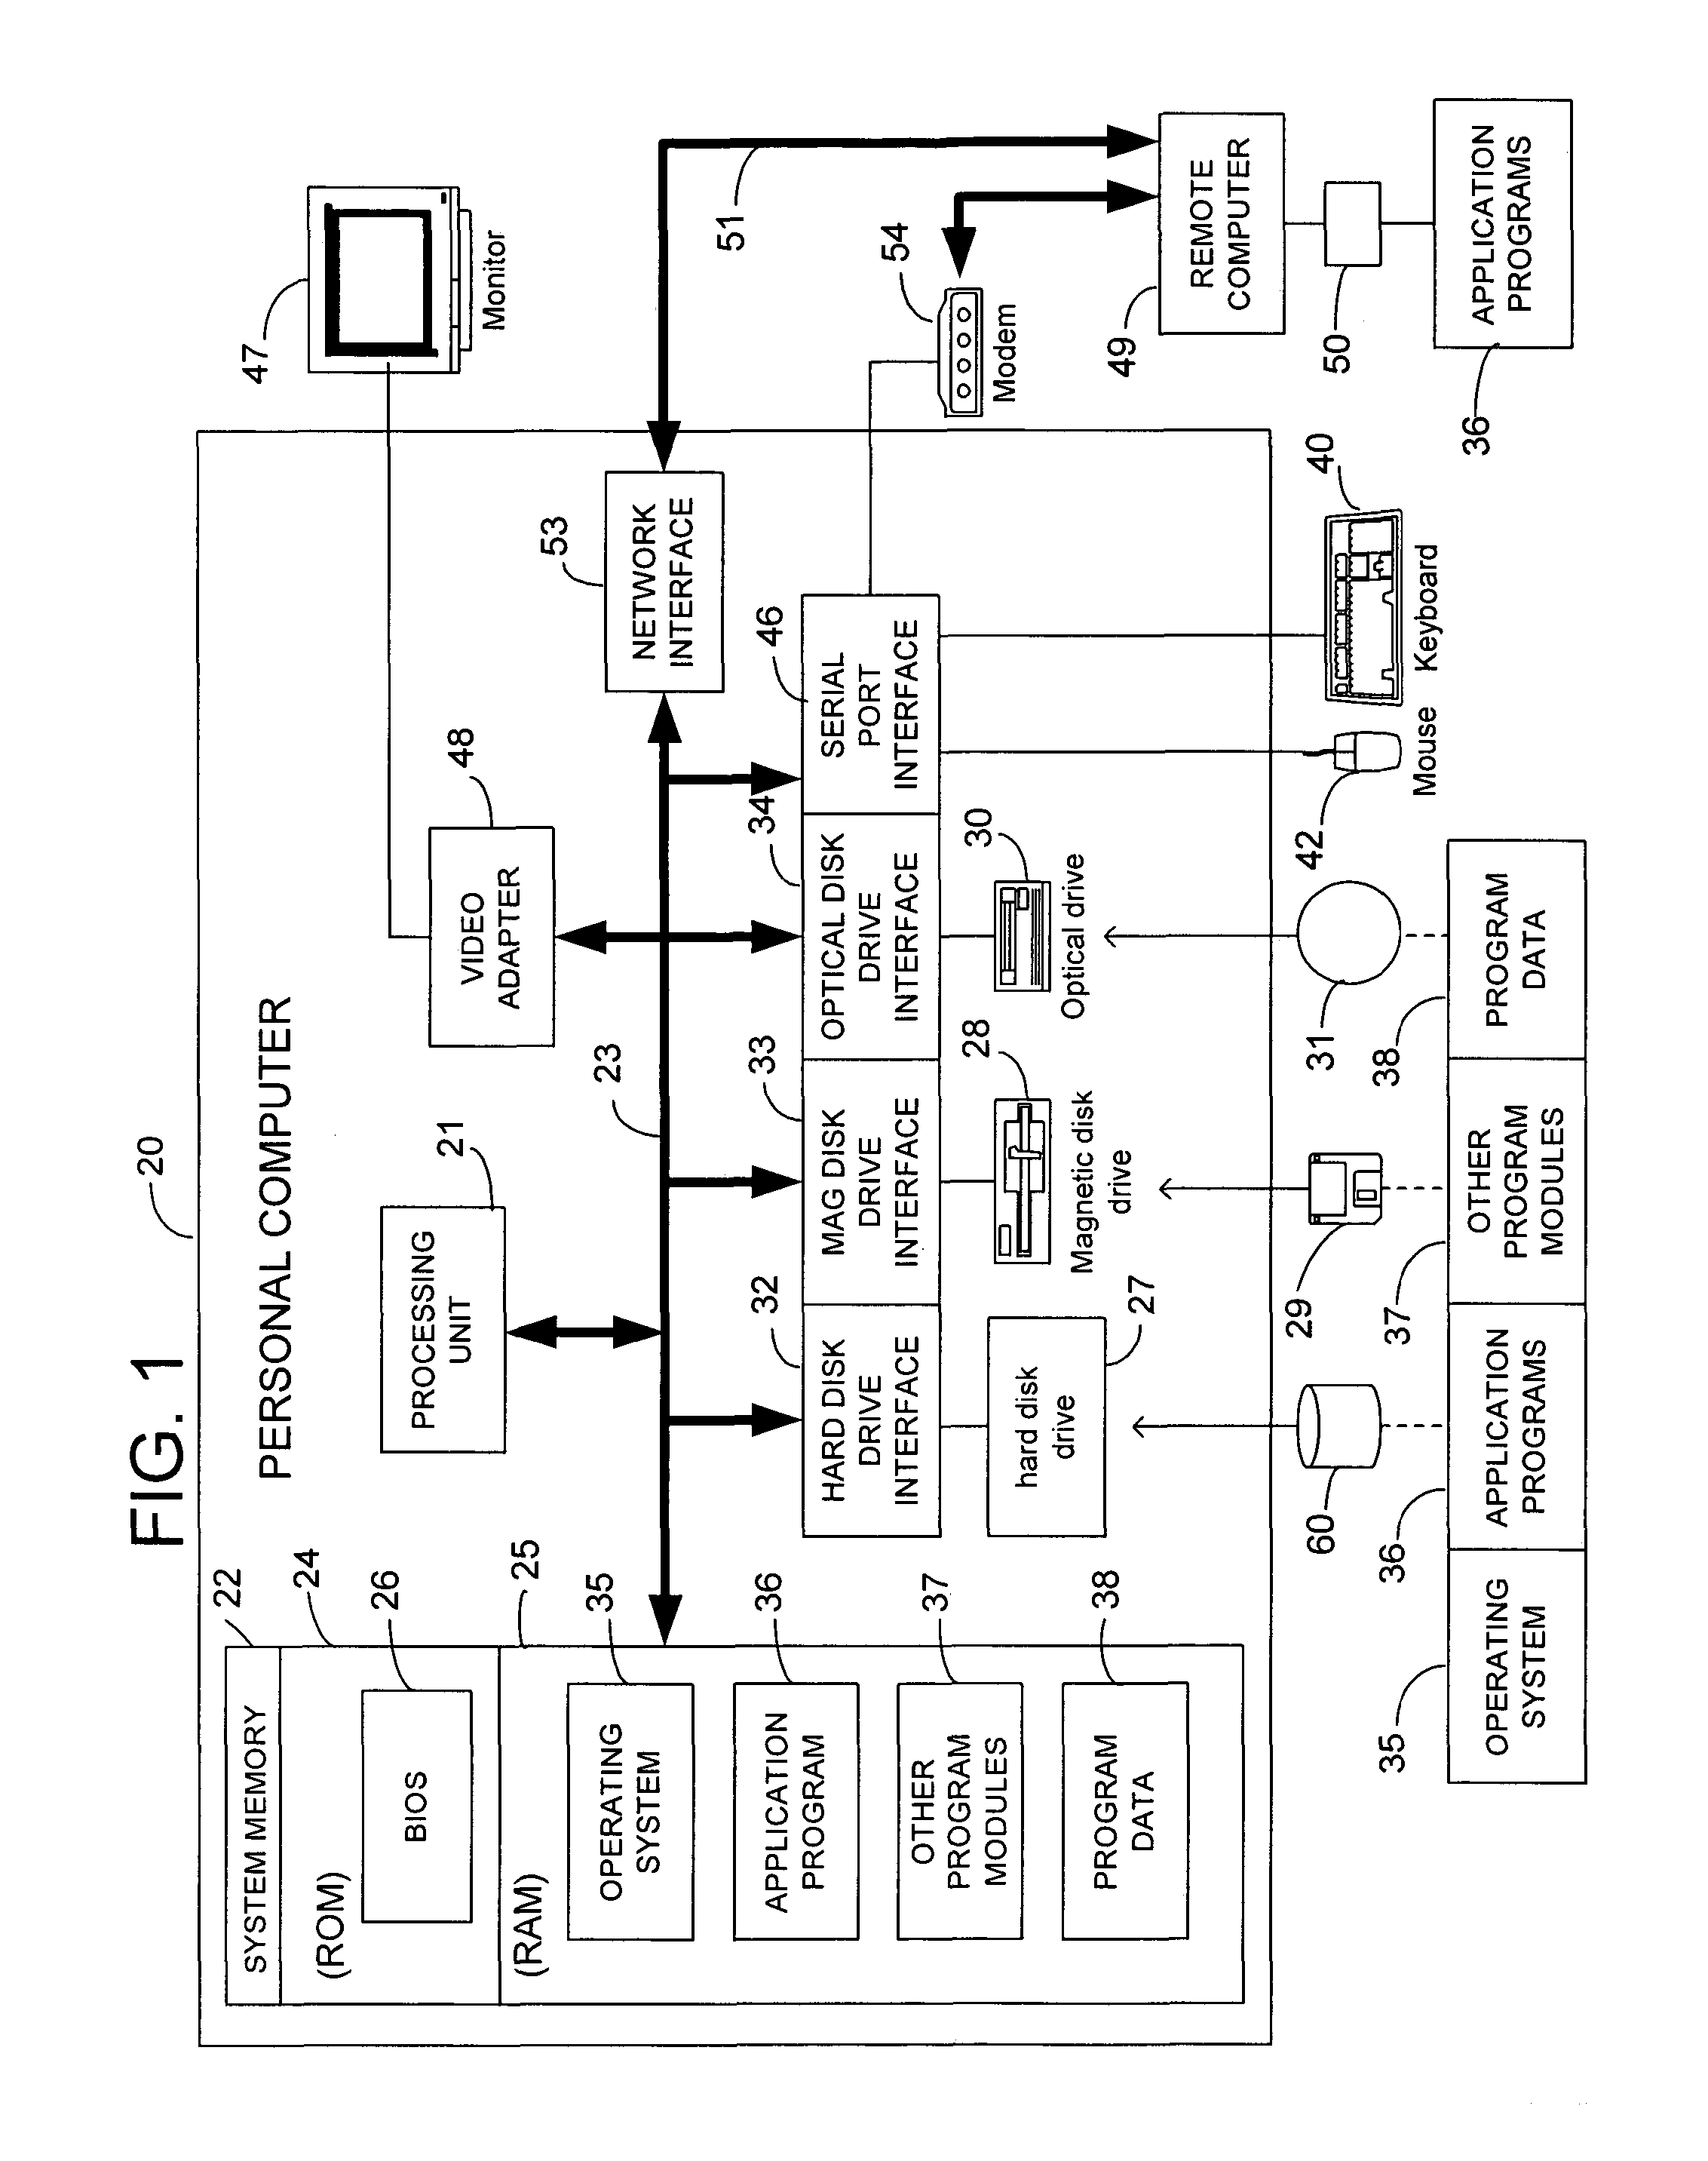 Method and system for accessing a network database as a web service